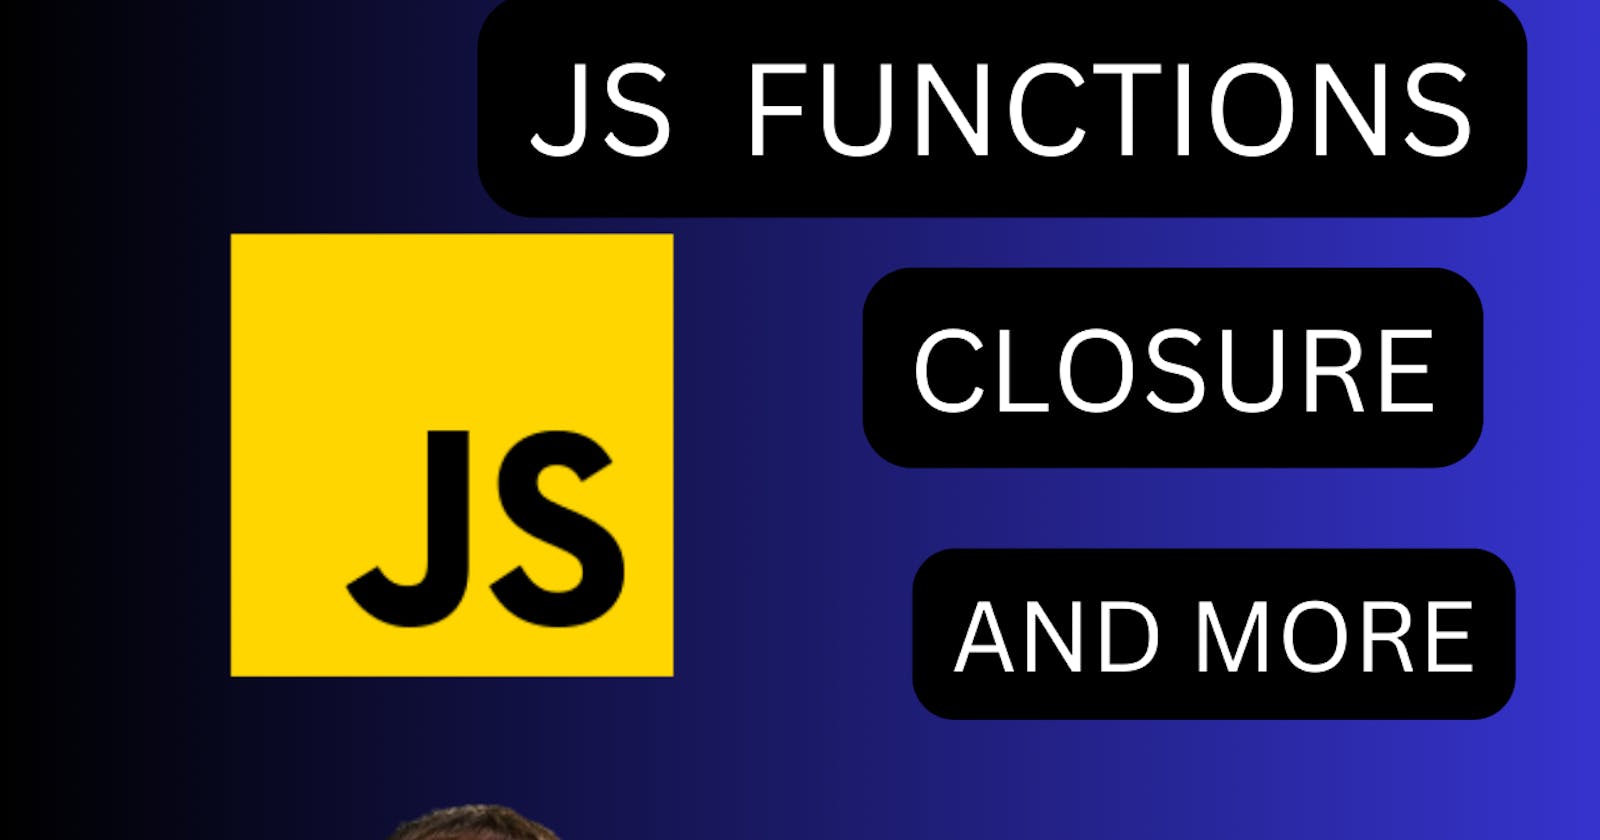 Javascript Functions Explained to a Five-Year-Old